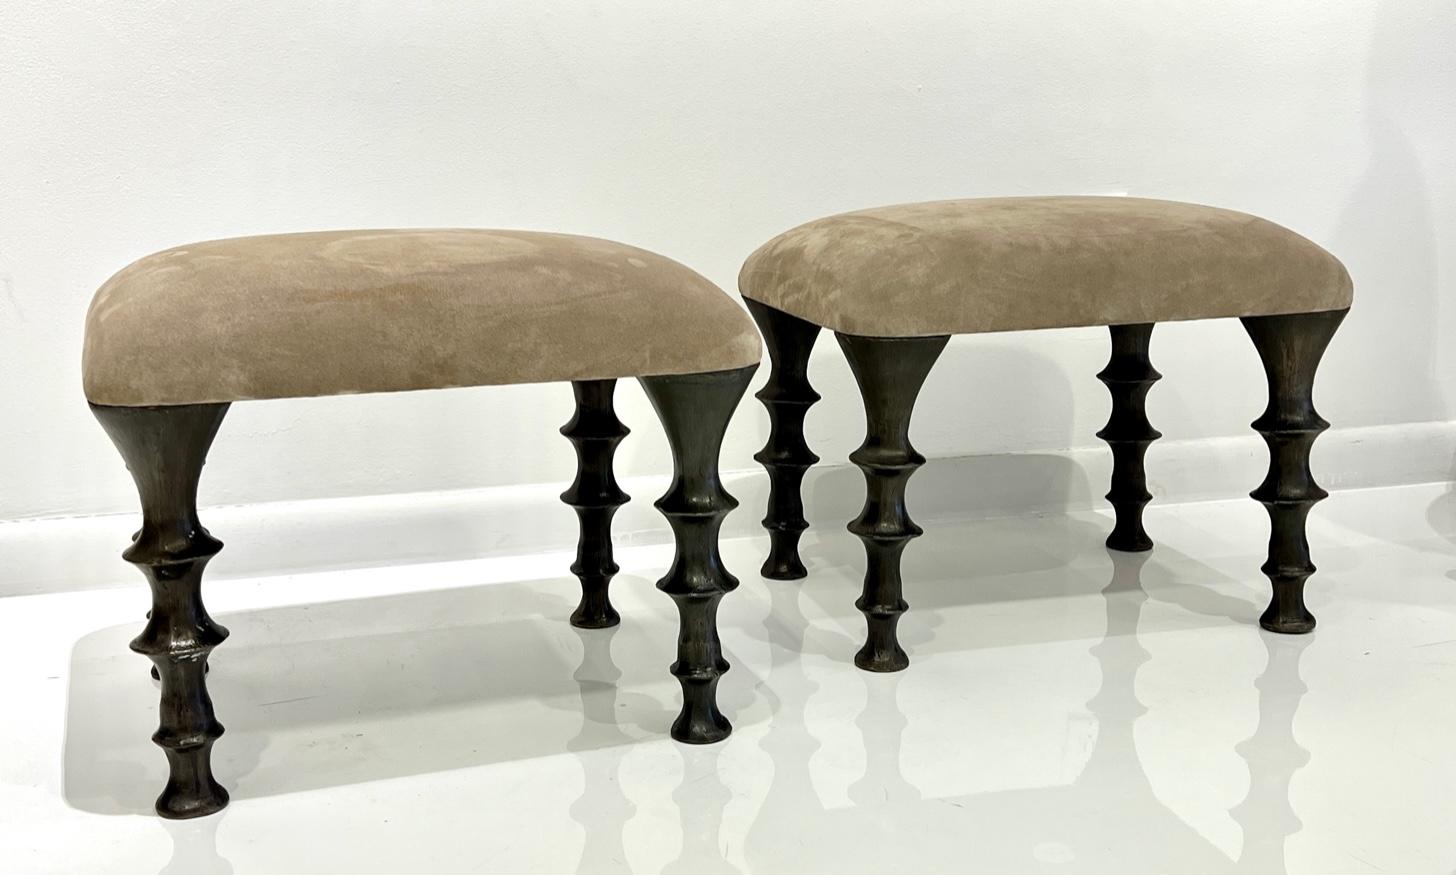 Contemporary Pair of St Paul Stools by Bourgeois Boheme Atelier For Sale